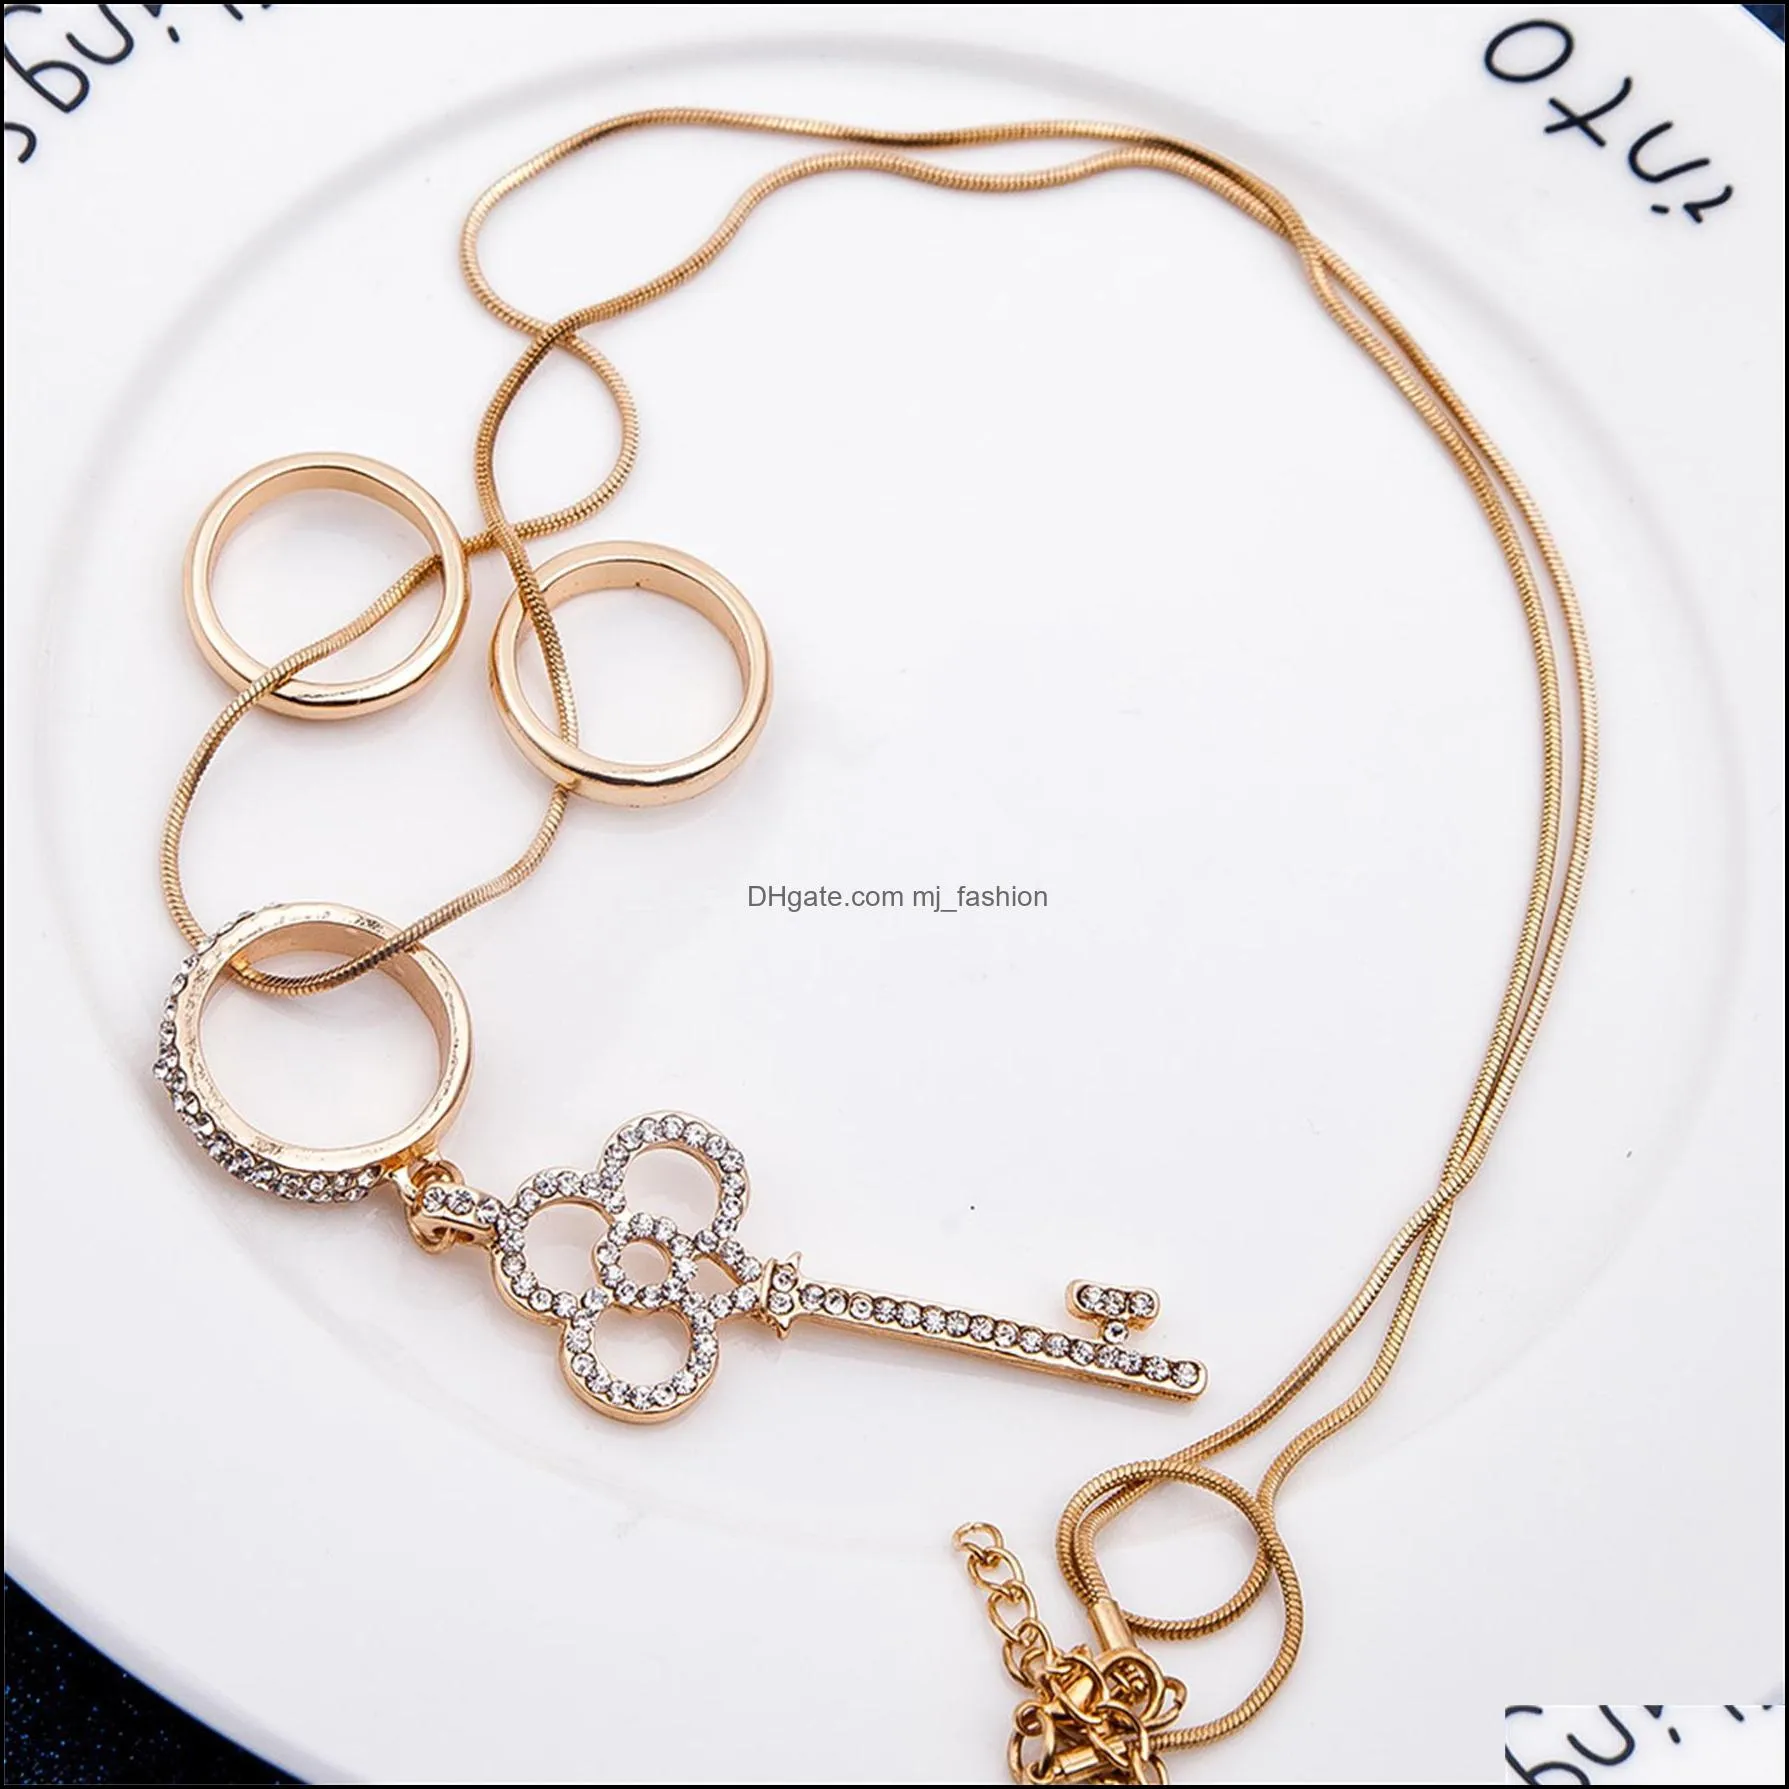 statement necklaces for women chic jewelry copper zircon rhinestone key charms pendants necklace key necklaces